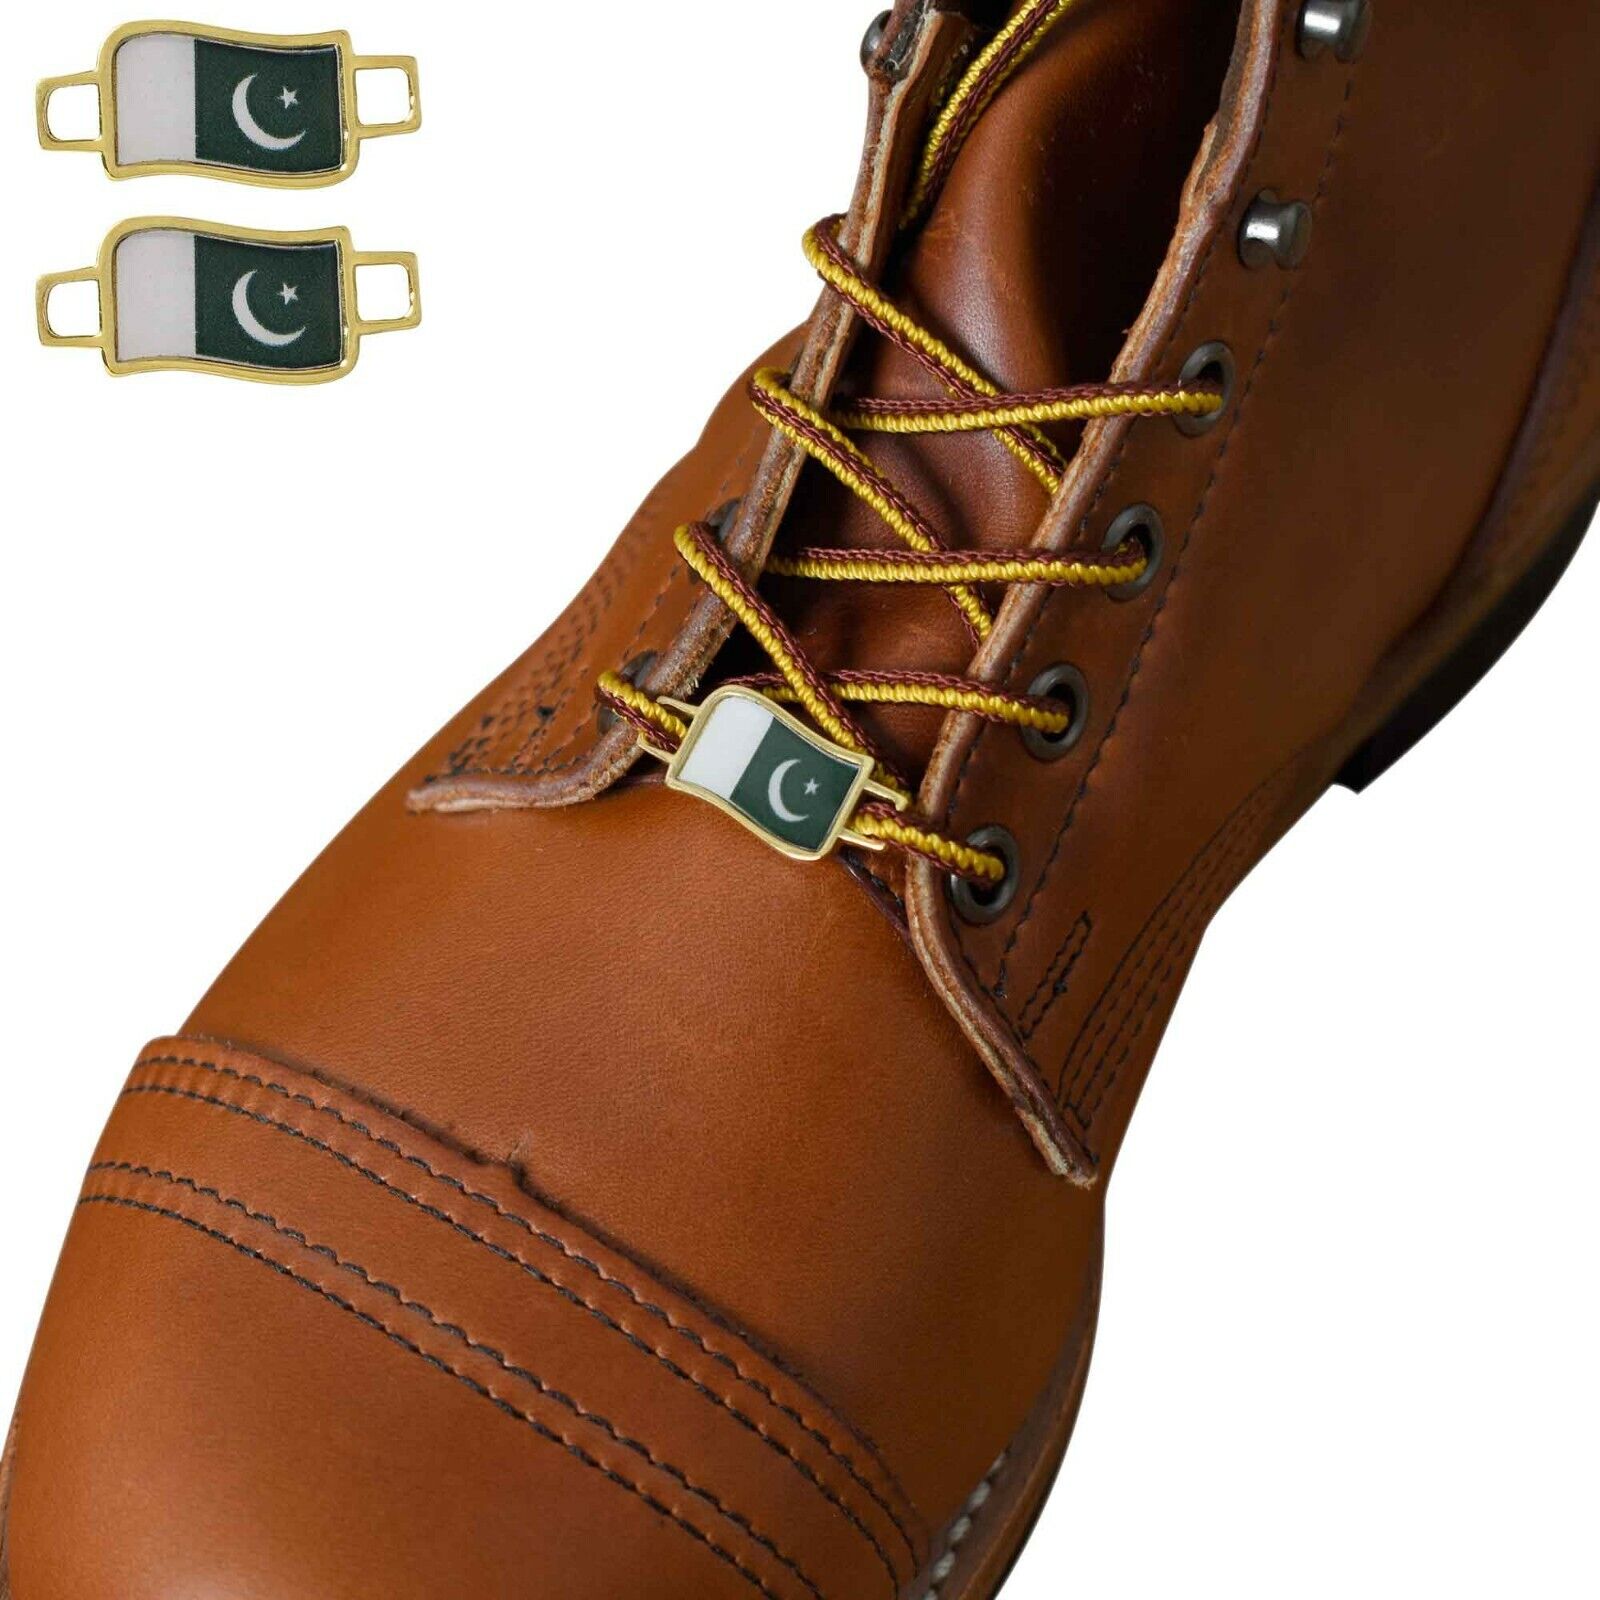 Pakistan Flags Shoes Boot Shoelace Keeper Holder Charm BrooklynMaker